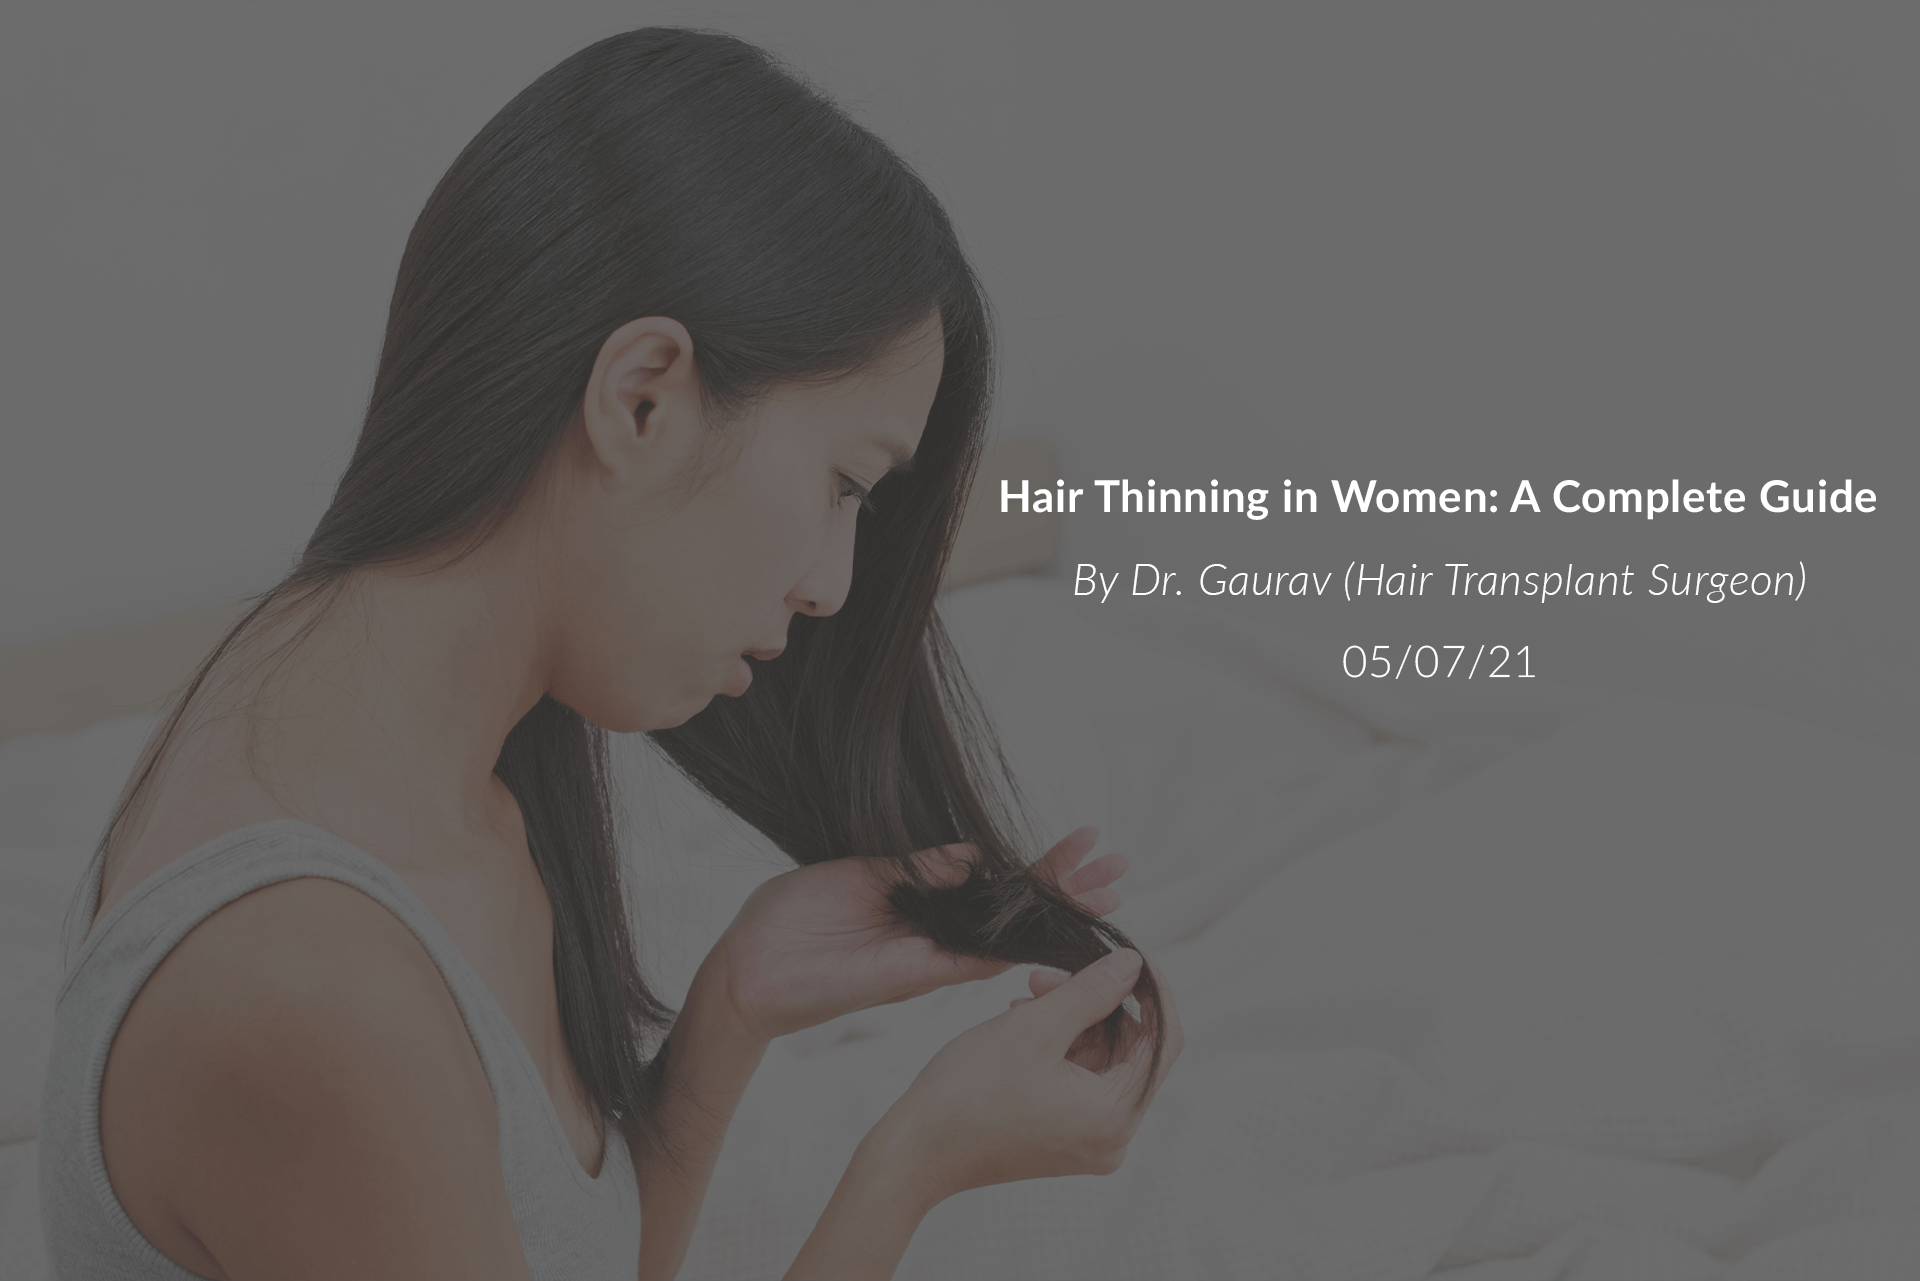 Hair Thinning In Women: A Complete Guide